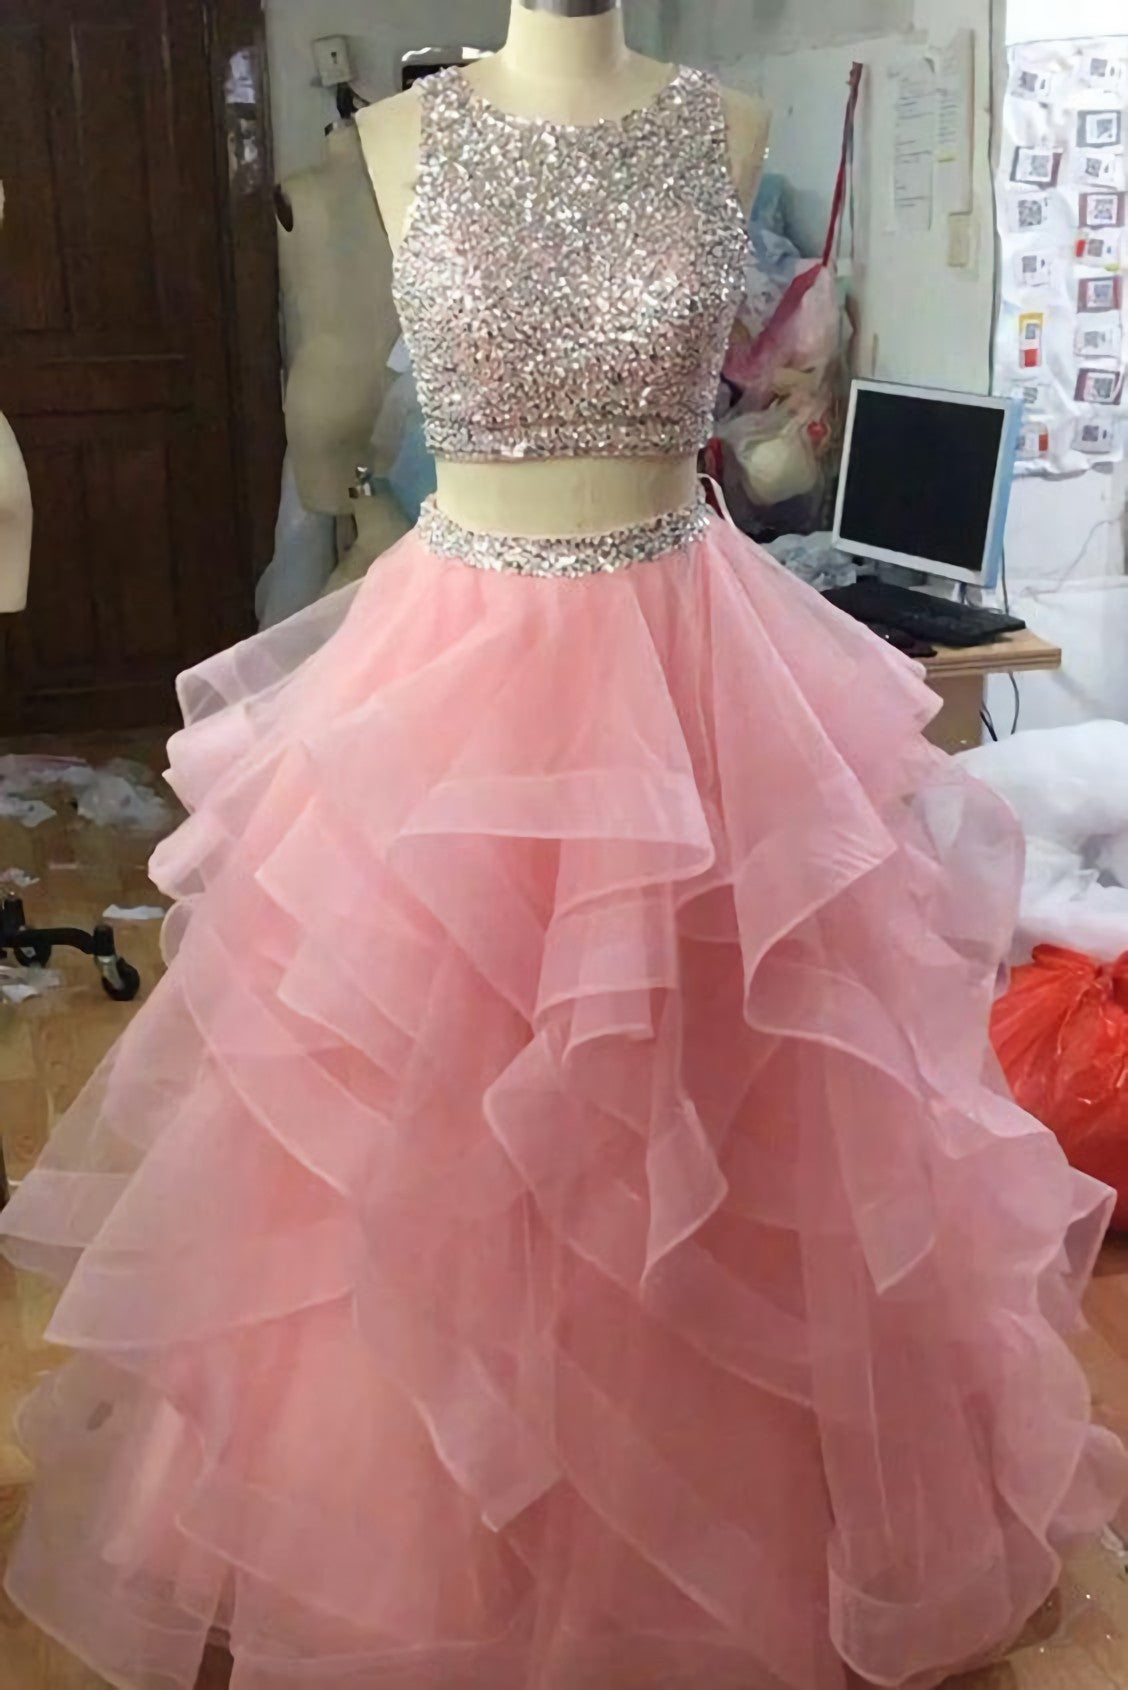 Prom Dresses Casual, Jewel Neck Pink Party Dresses, Sequins And Beaded 2 Pieces Prom Dresses, Ruffle And Tiered Tulle Affordable Evening Dresses